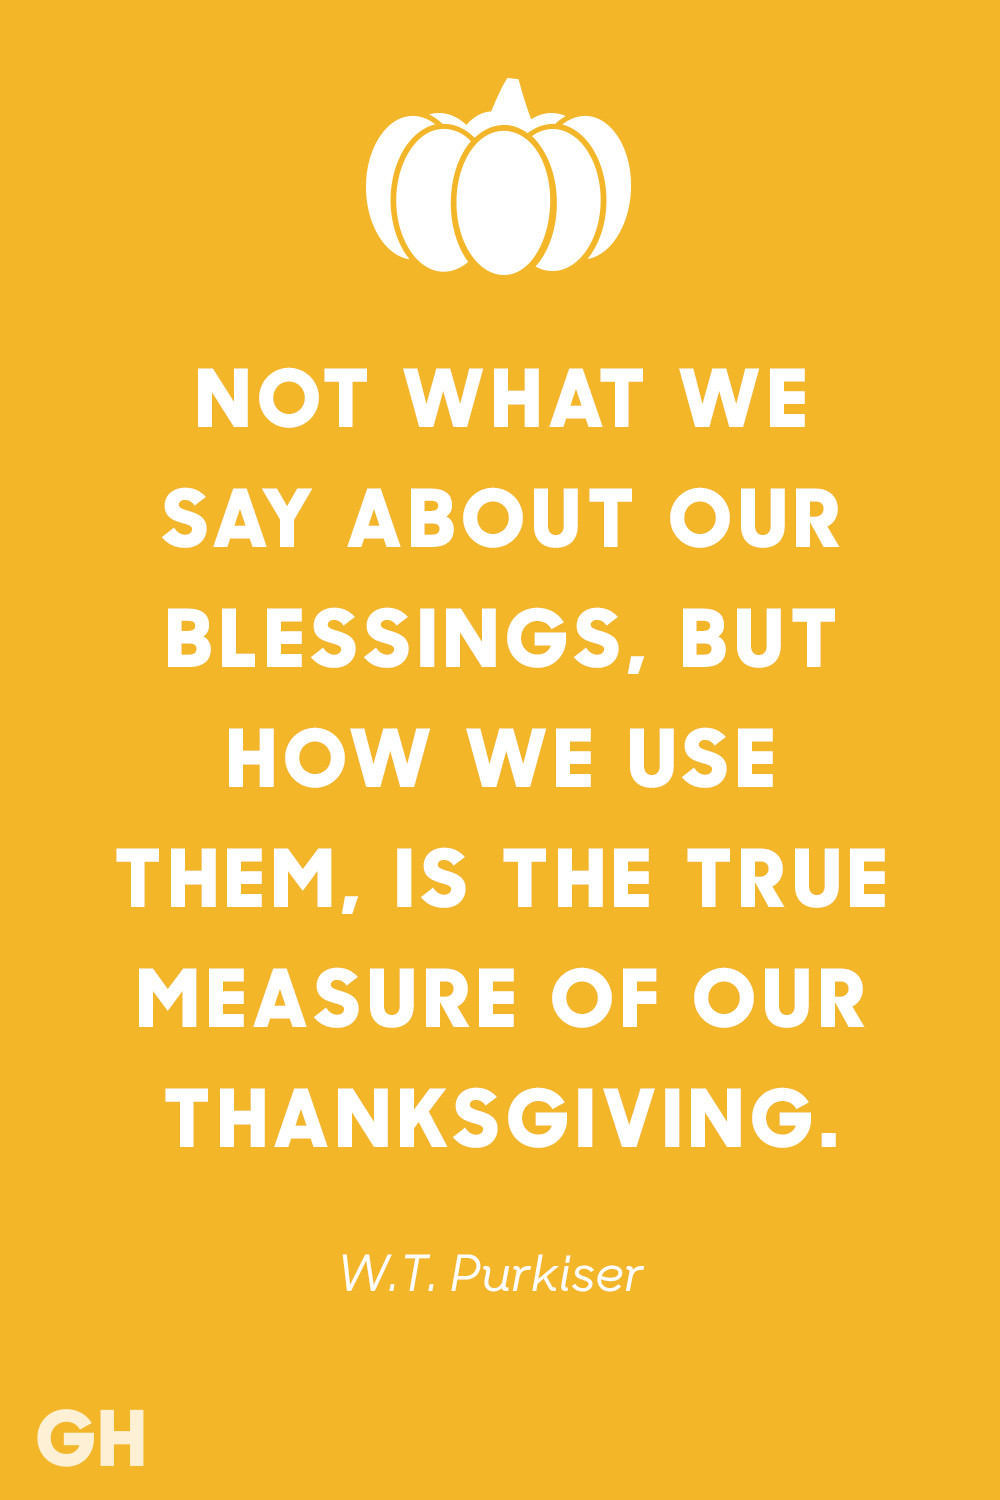 Quotes On Thanksgiving
 15 Best Thanksgiving Quotes Inspirational and Funny